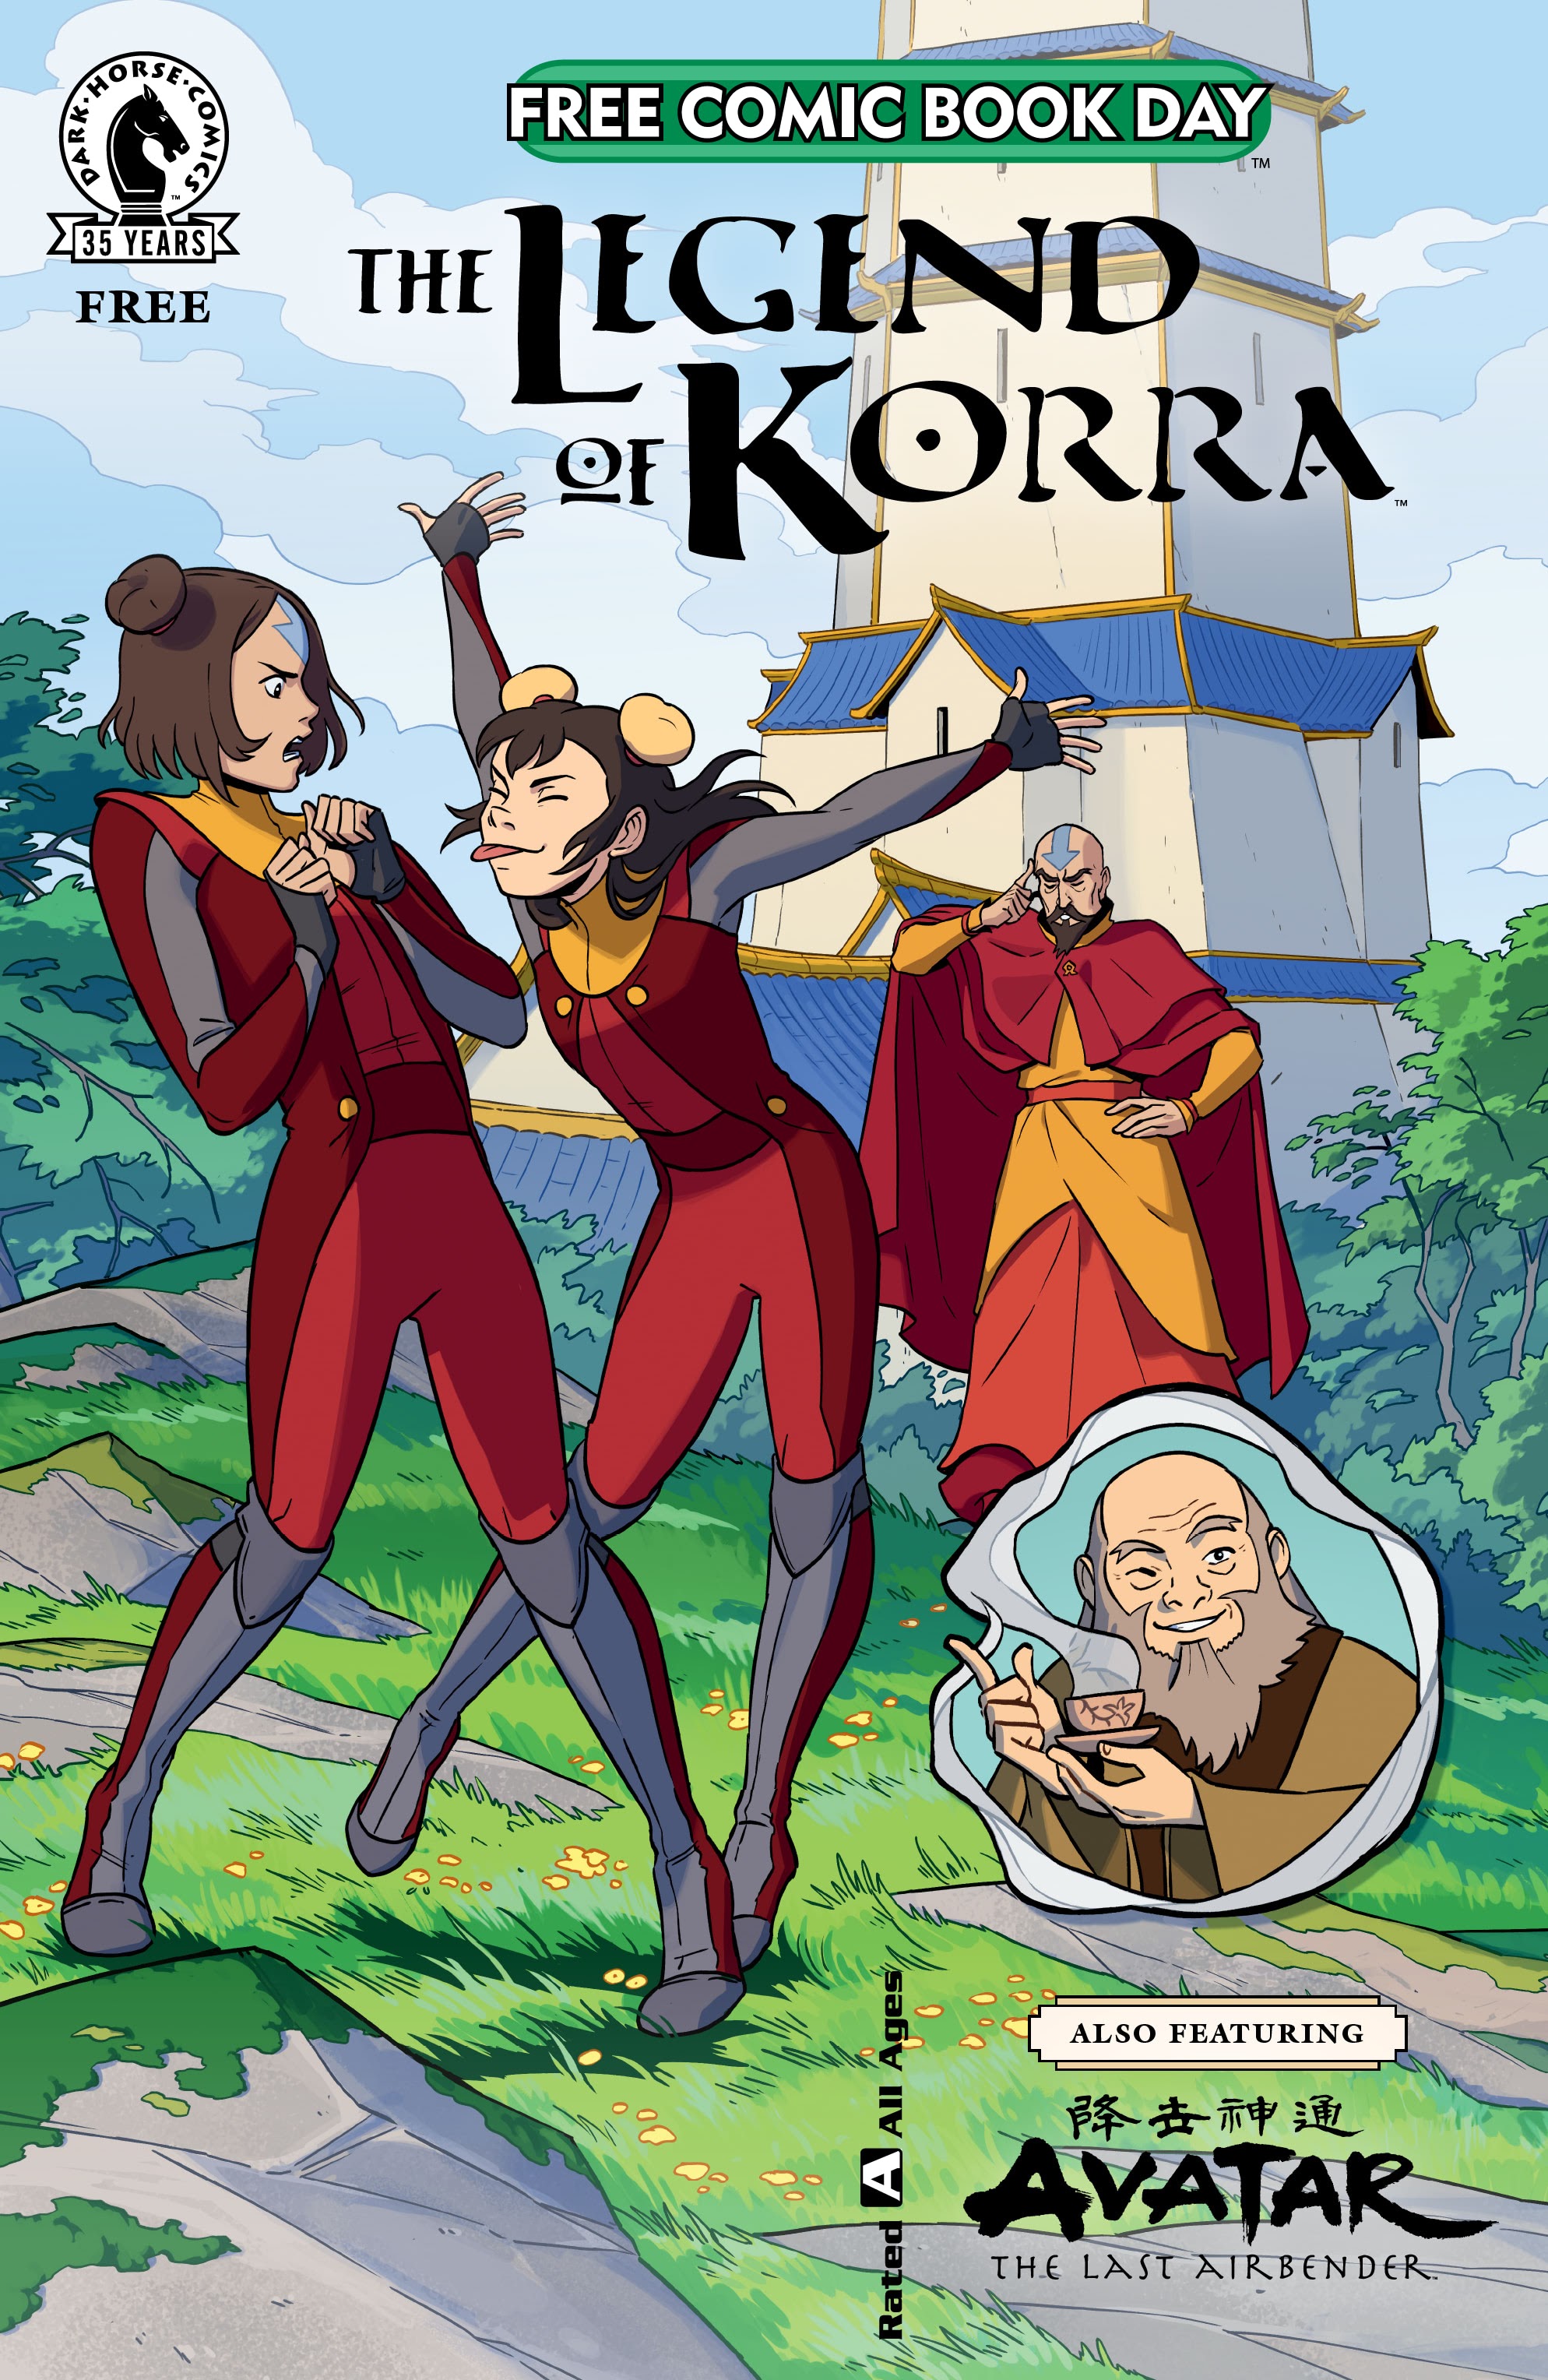 Read online Free Comic Book Day 2021 comic -  Issue # Avatar - The Last Airbender - The Legend of Korra - 1